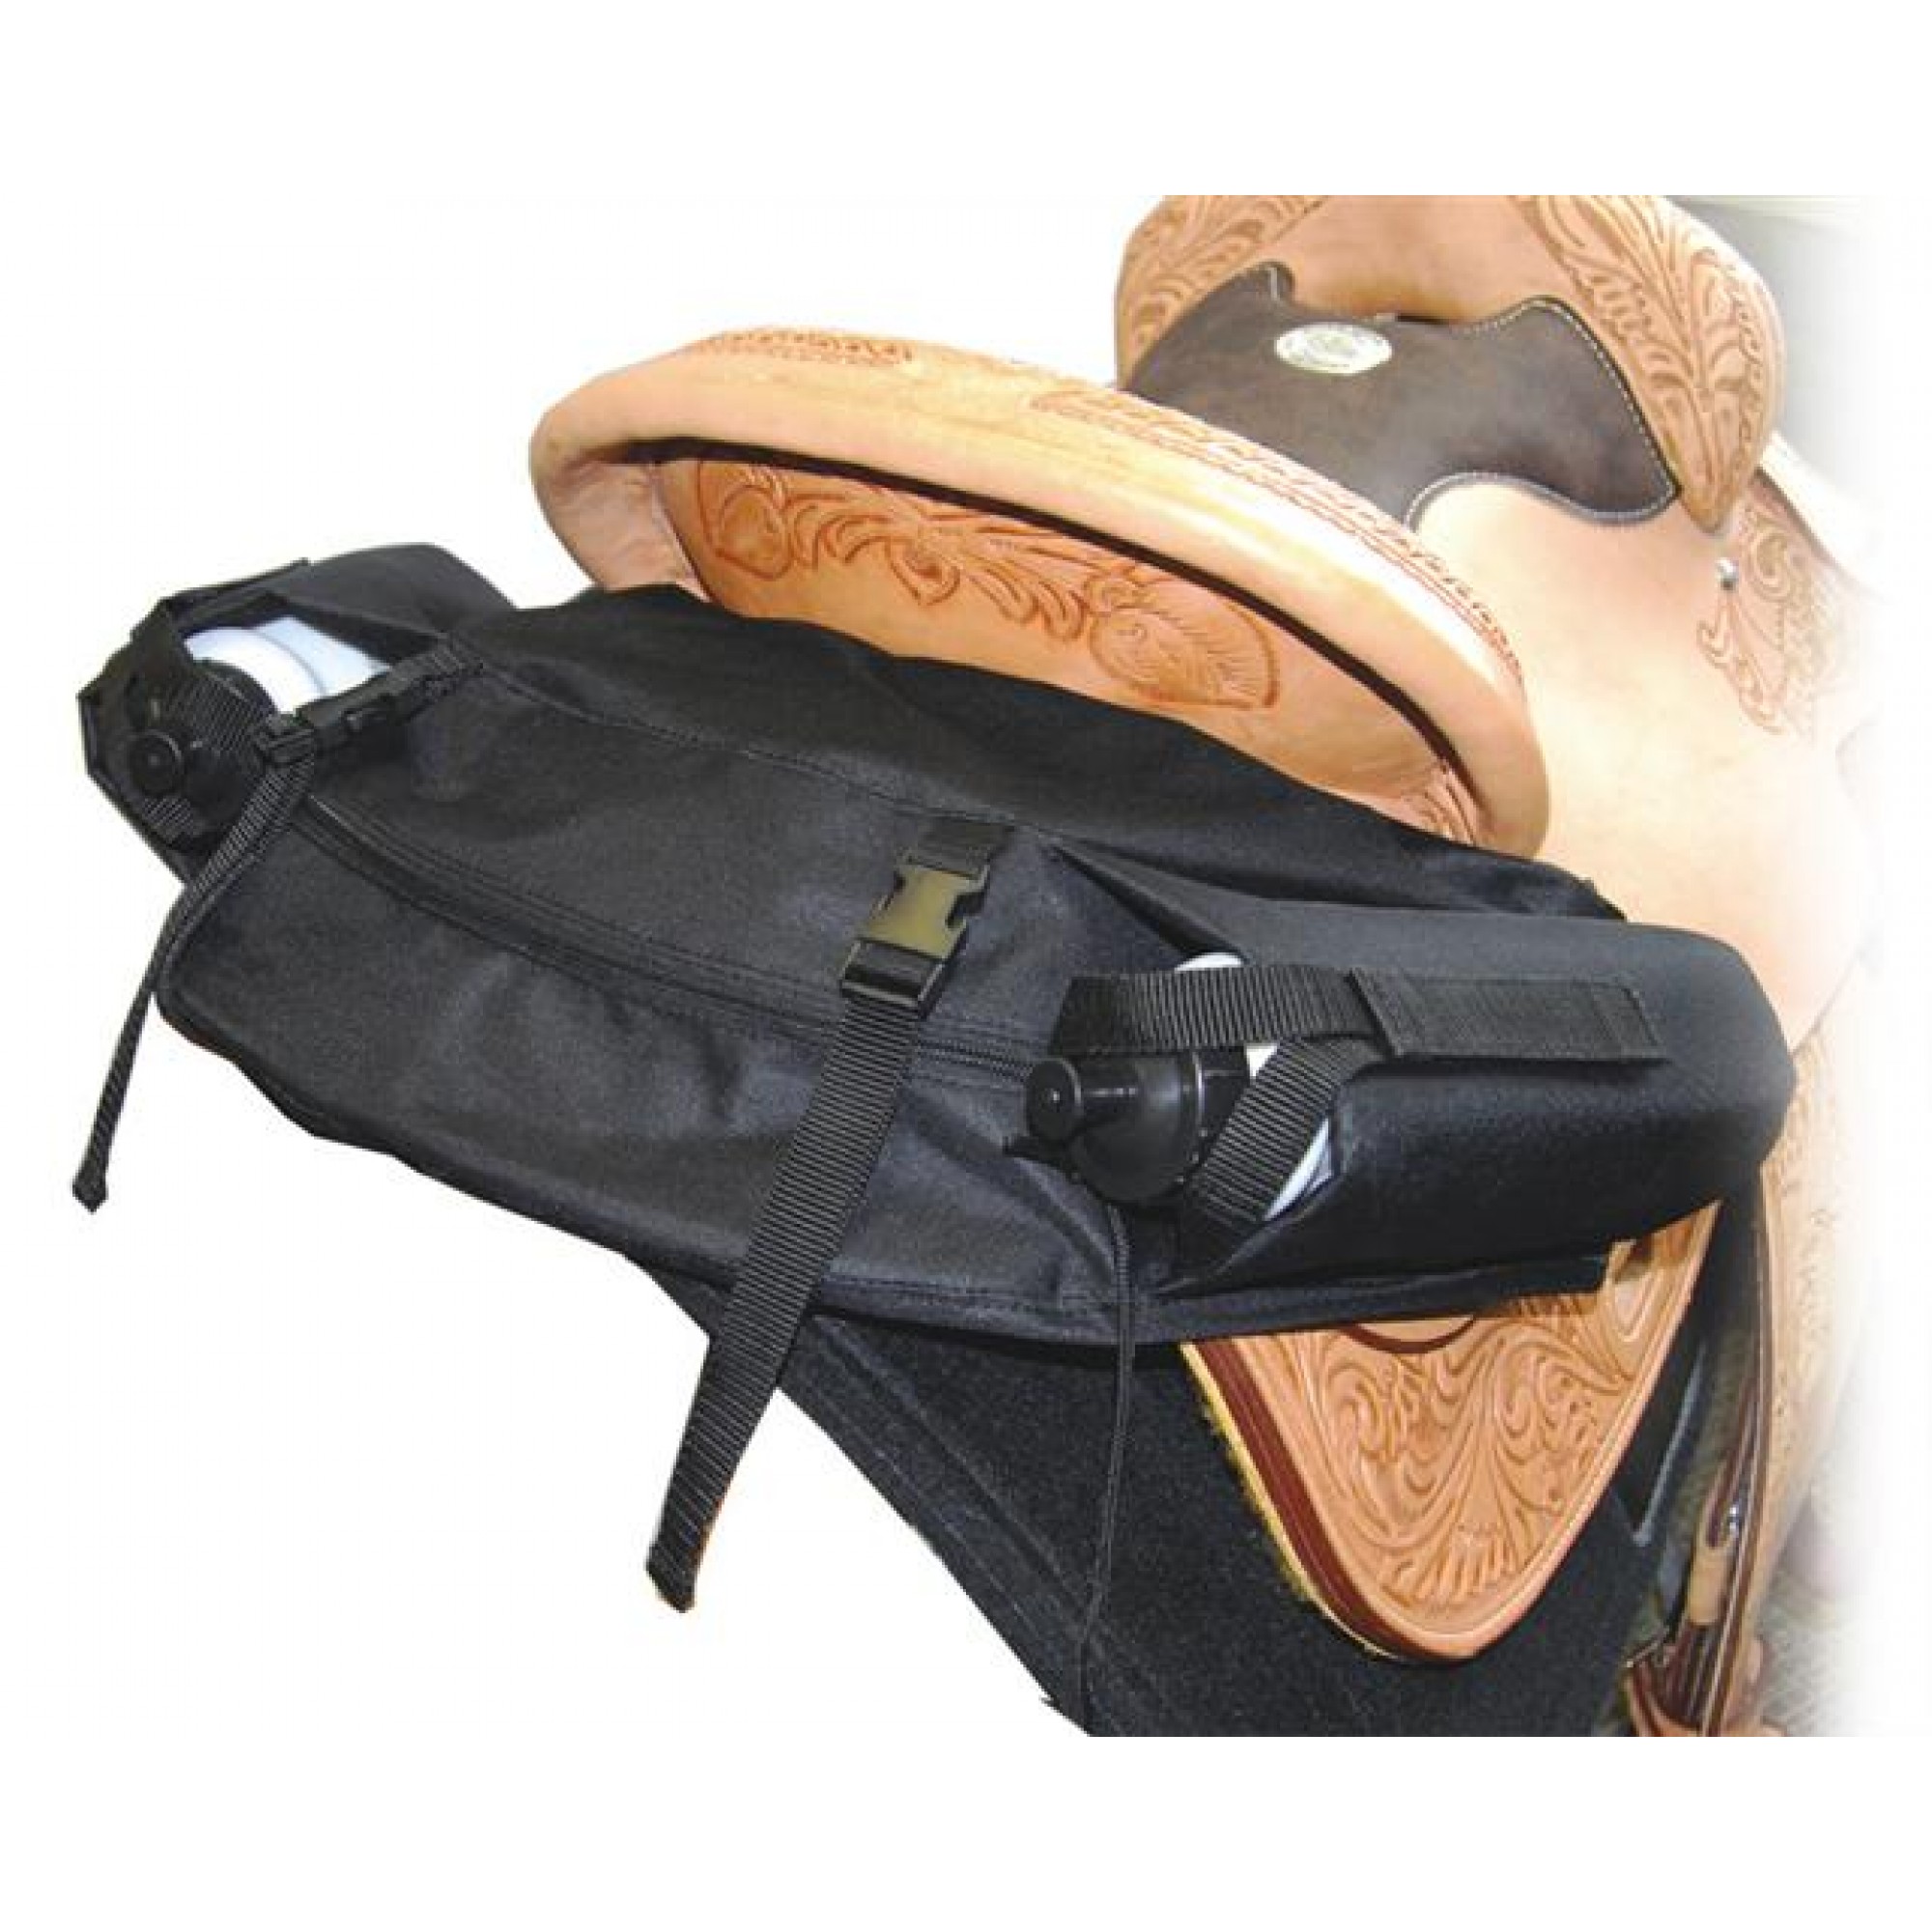 EasyCare Stowaway Western Cantle Saddle Bags